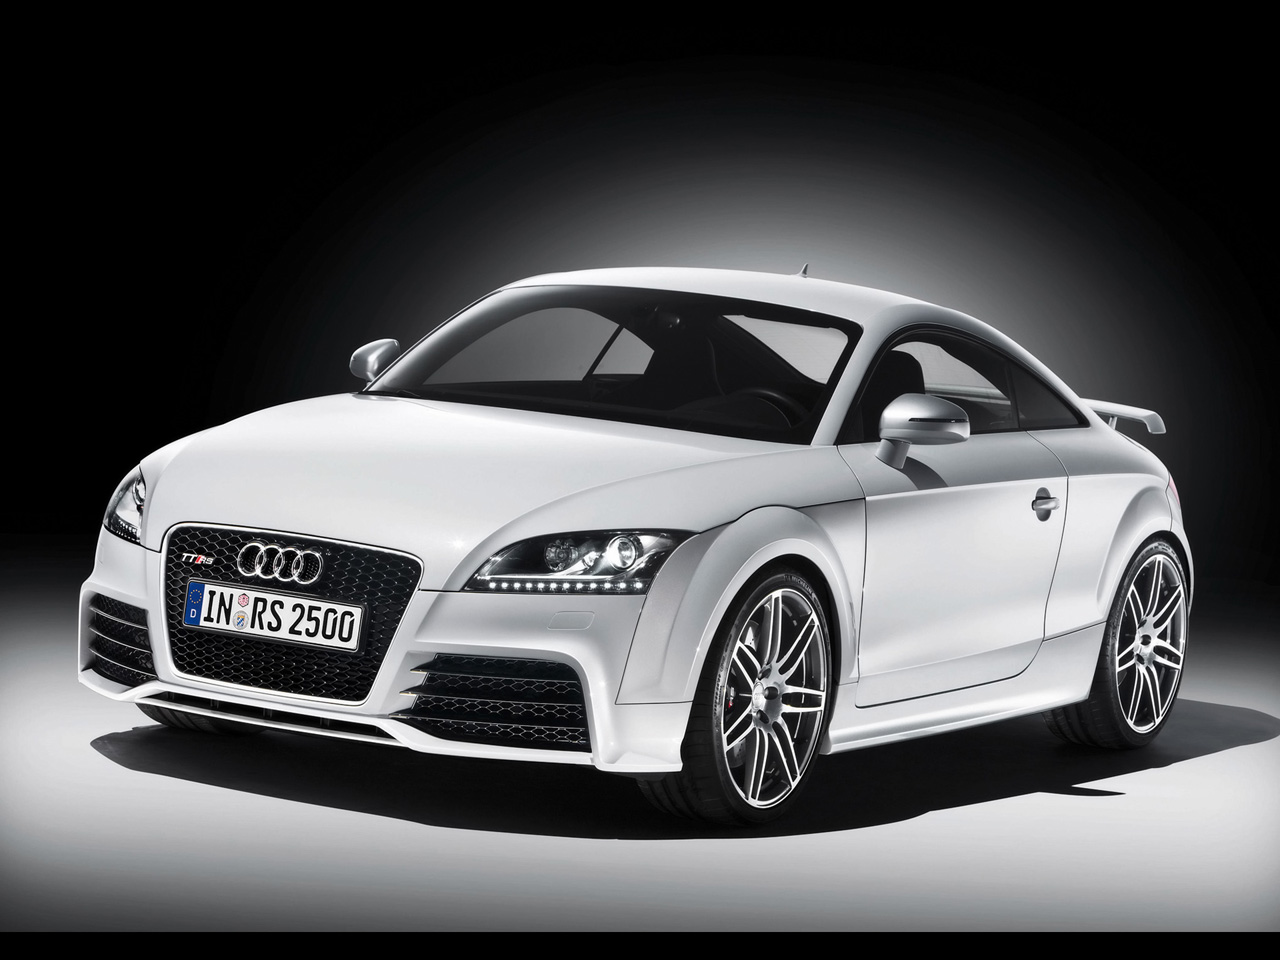 2009-Audi-TT-RS-Coupe-Studio-Front-Angle-1280x960